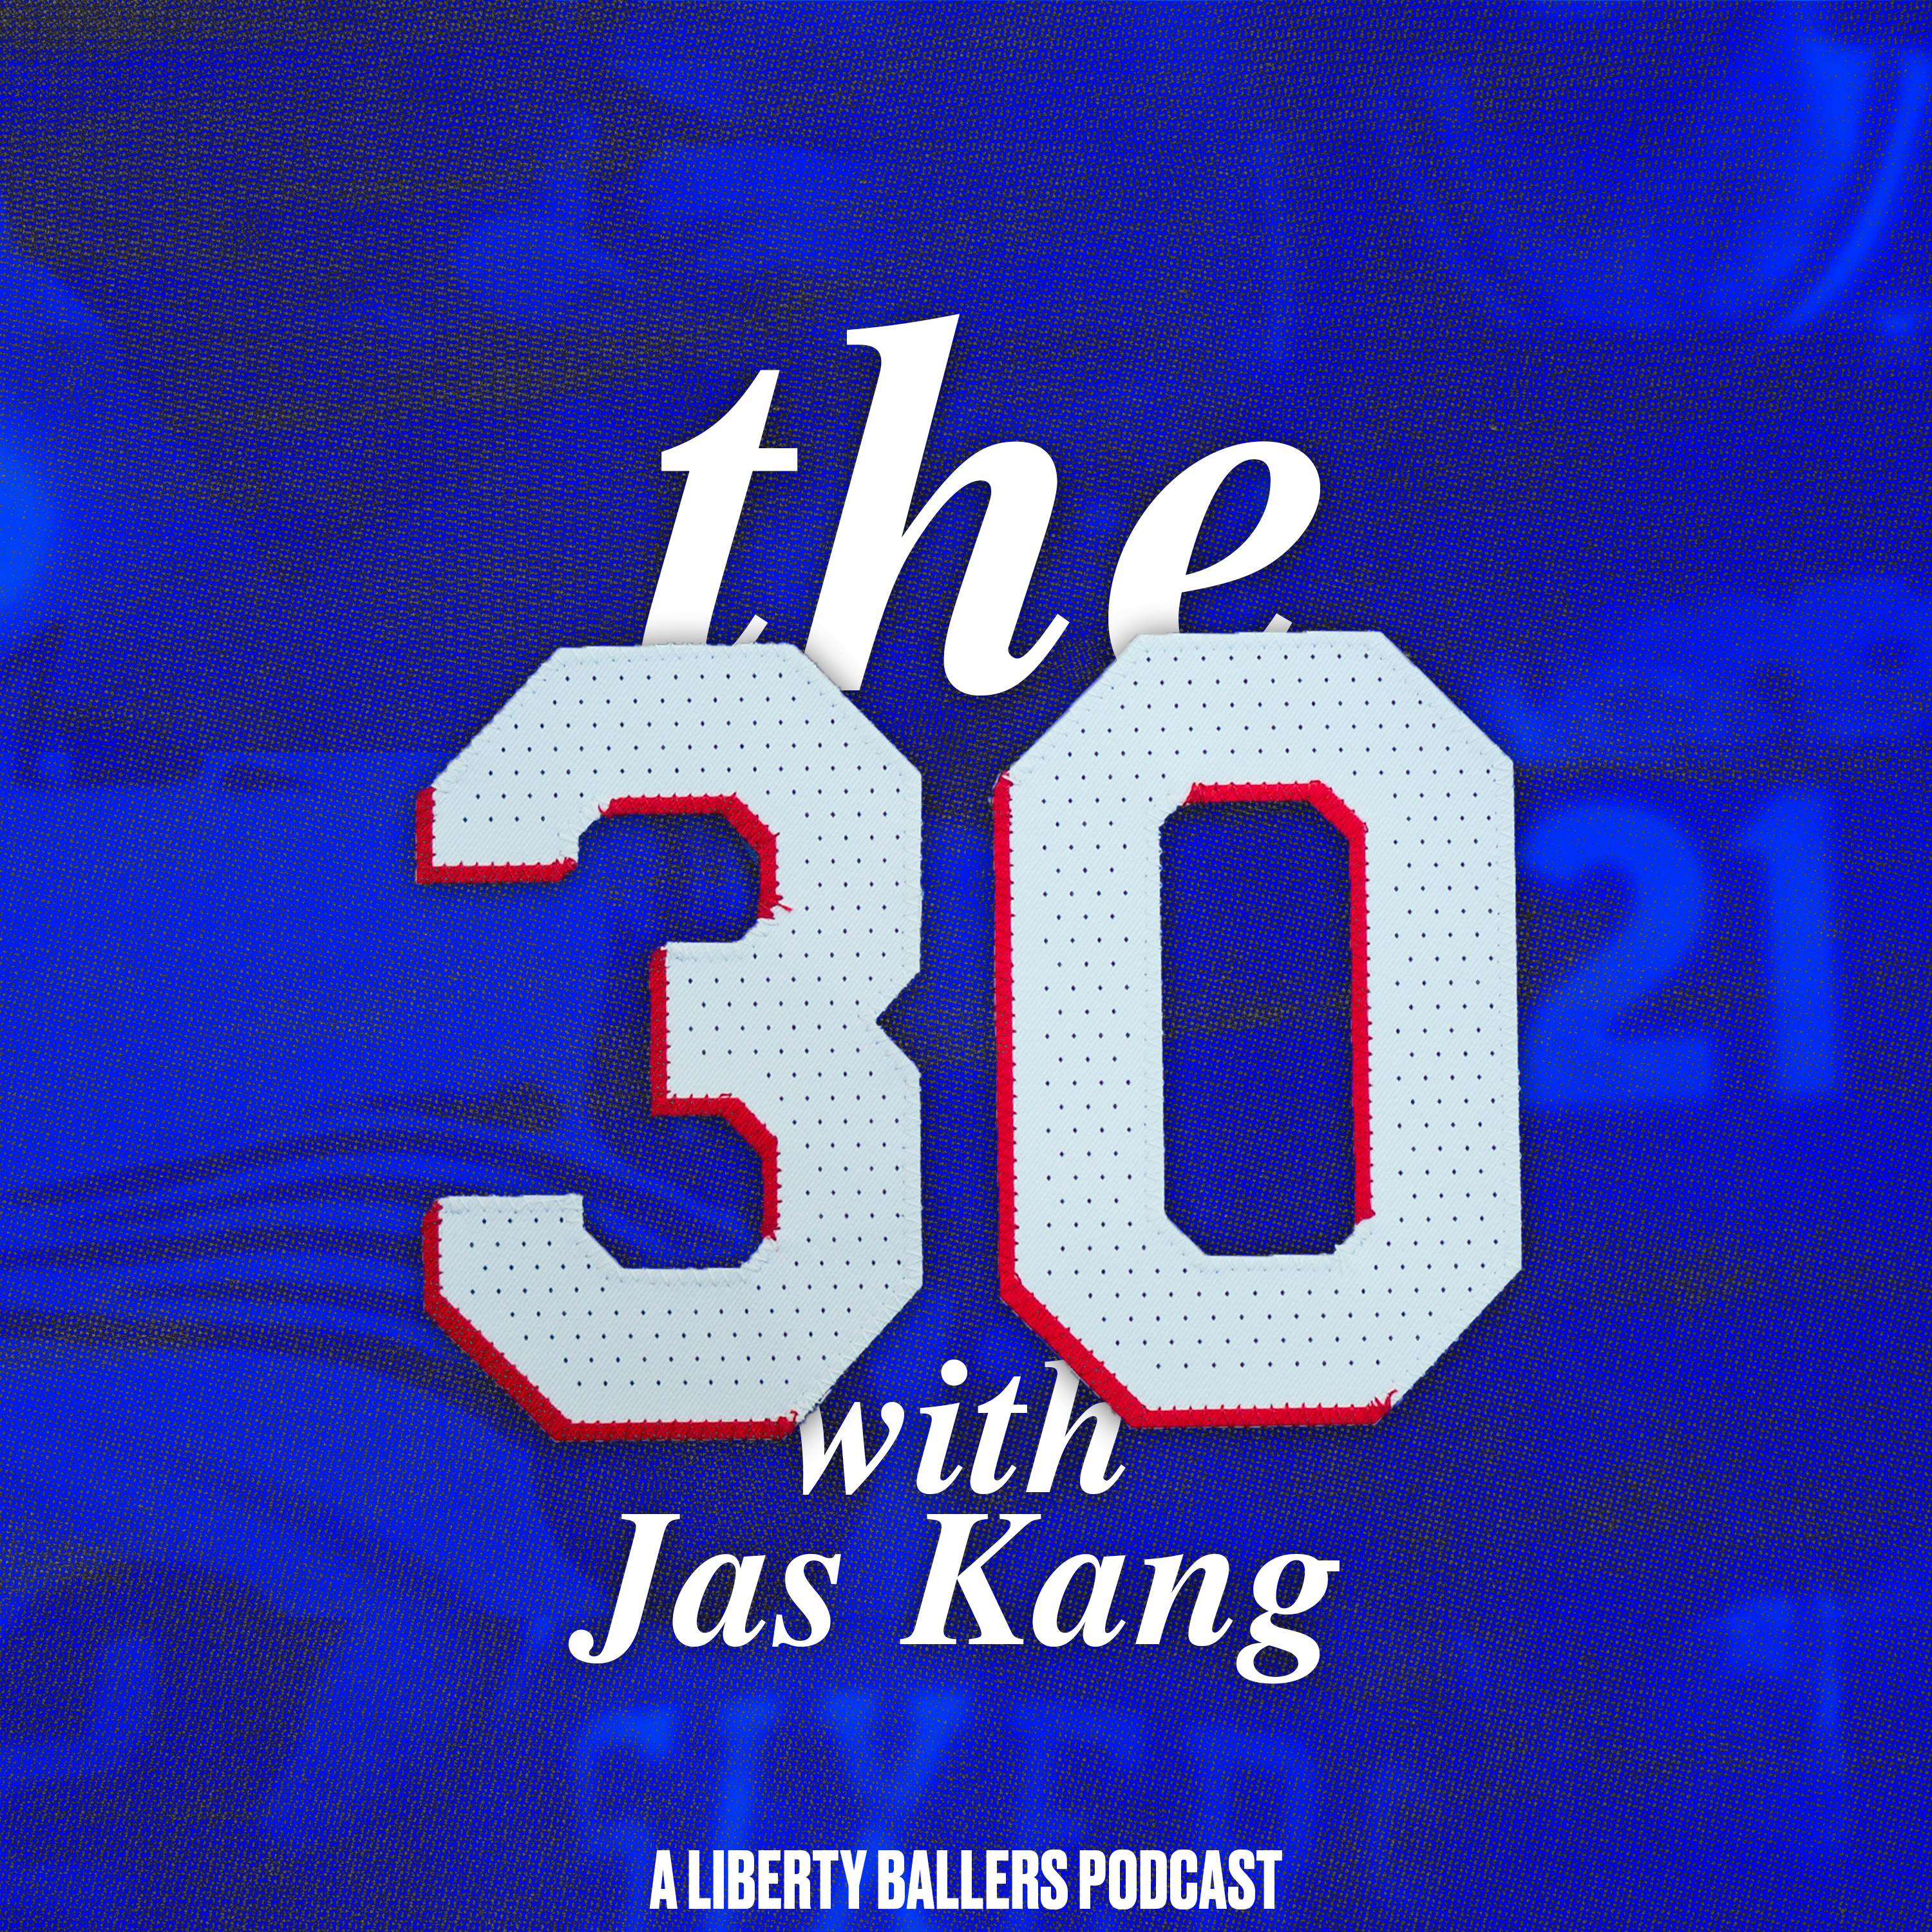 Joel Embiid and James Harden are finding their groove, helping the Sixers win 3 in a row. The 30: With Jackson Frank